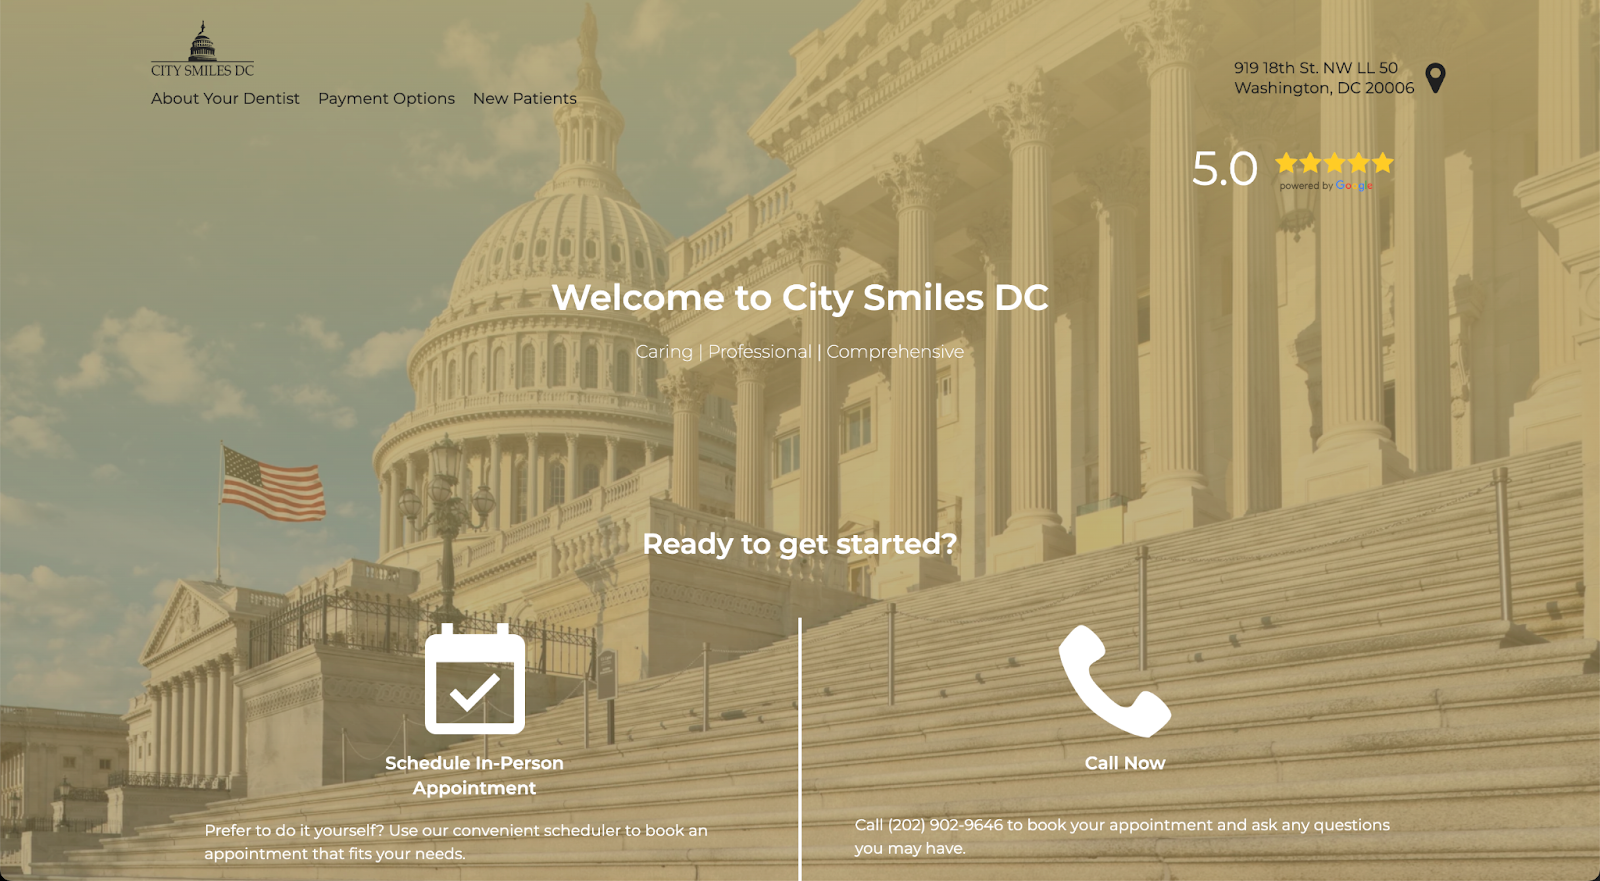 Use your local surroundings to serve as your inspiration point for your dental website, like City Smile DC did